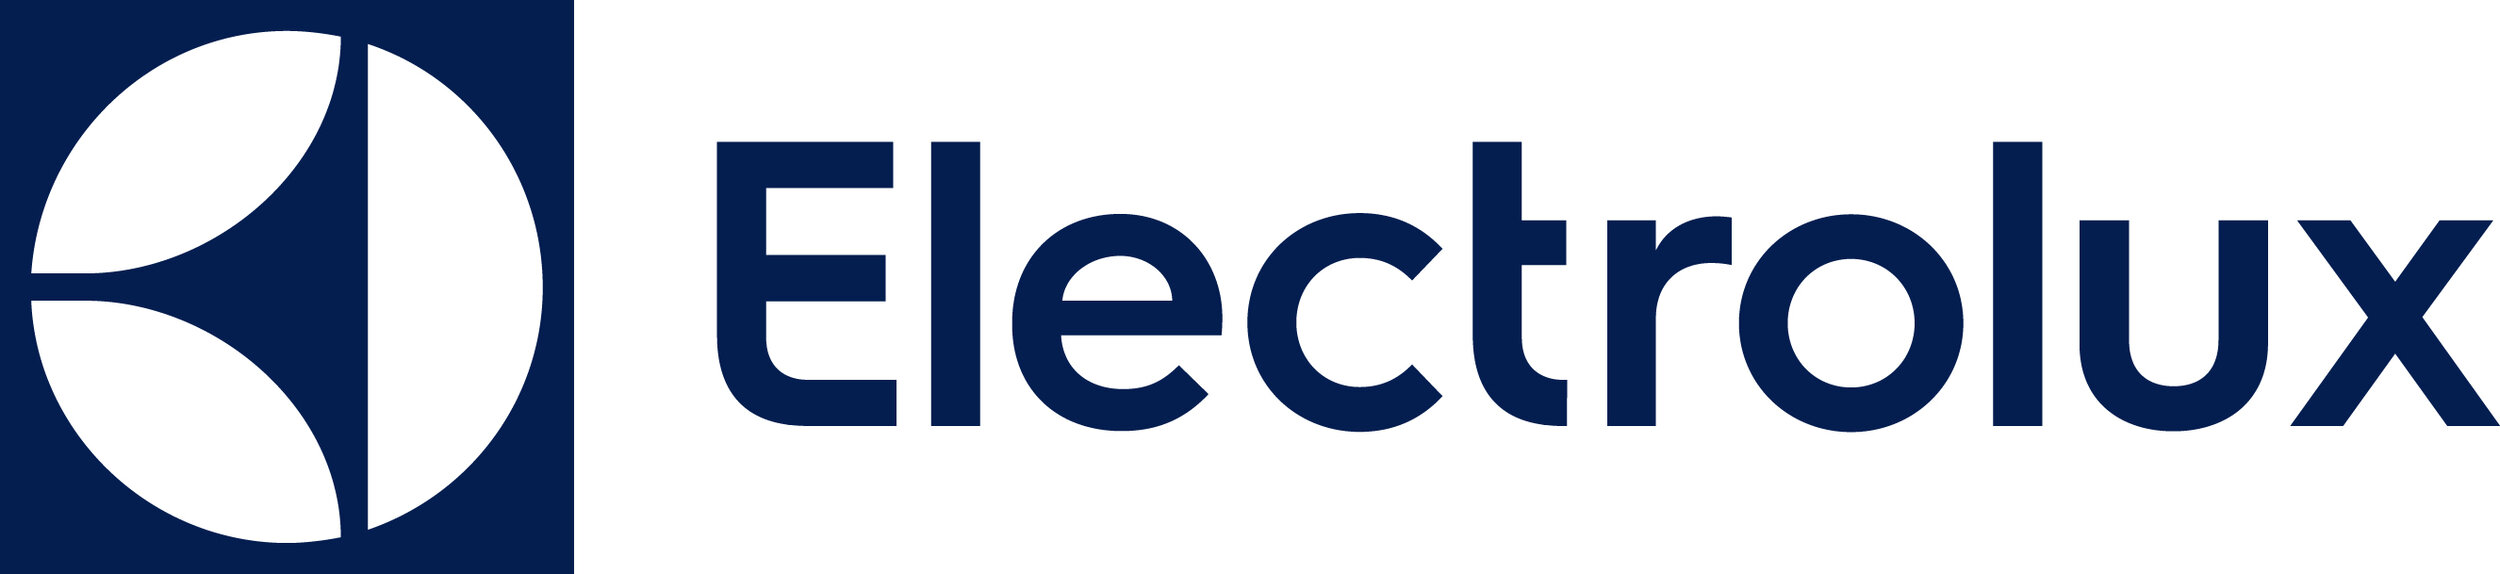 Electrolux logo navy - Hunter Valley Appliance Repairs